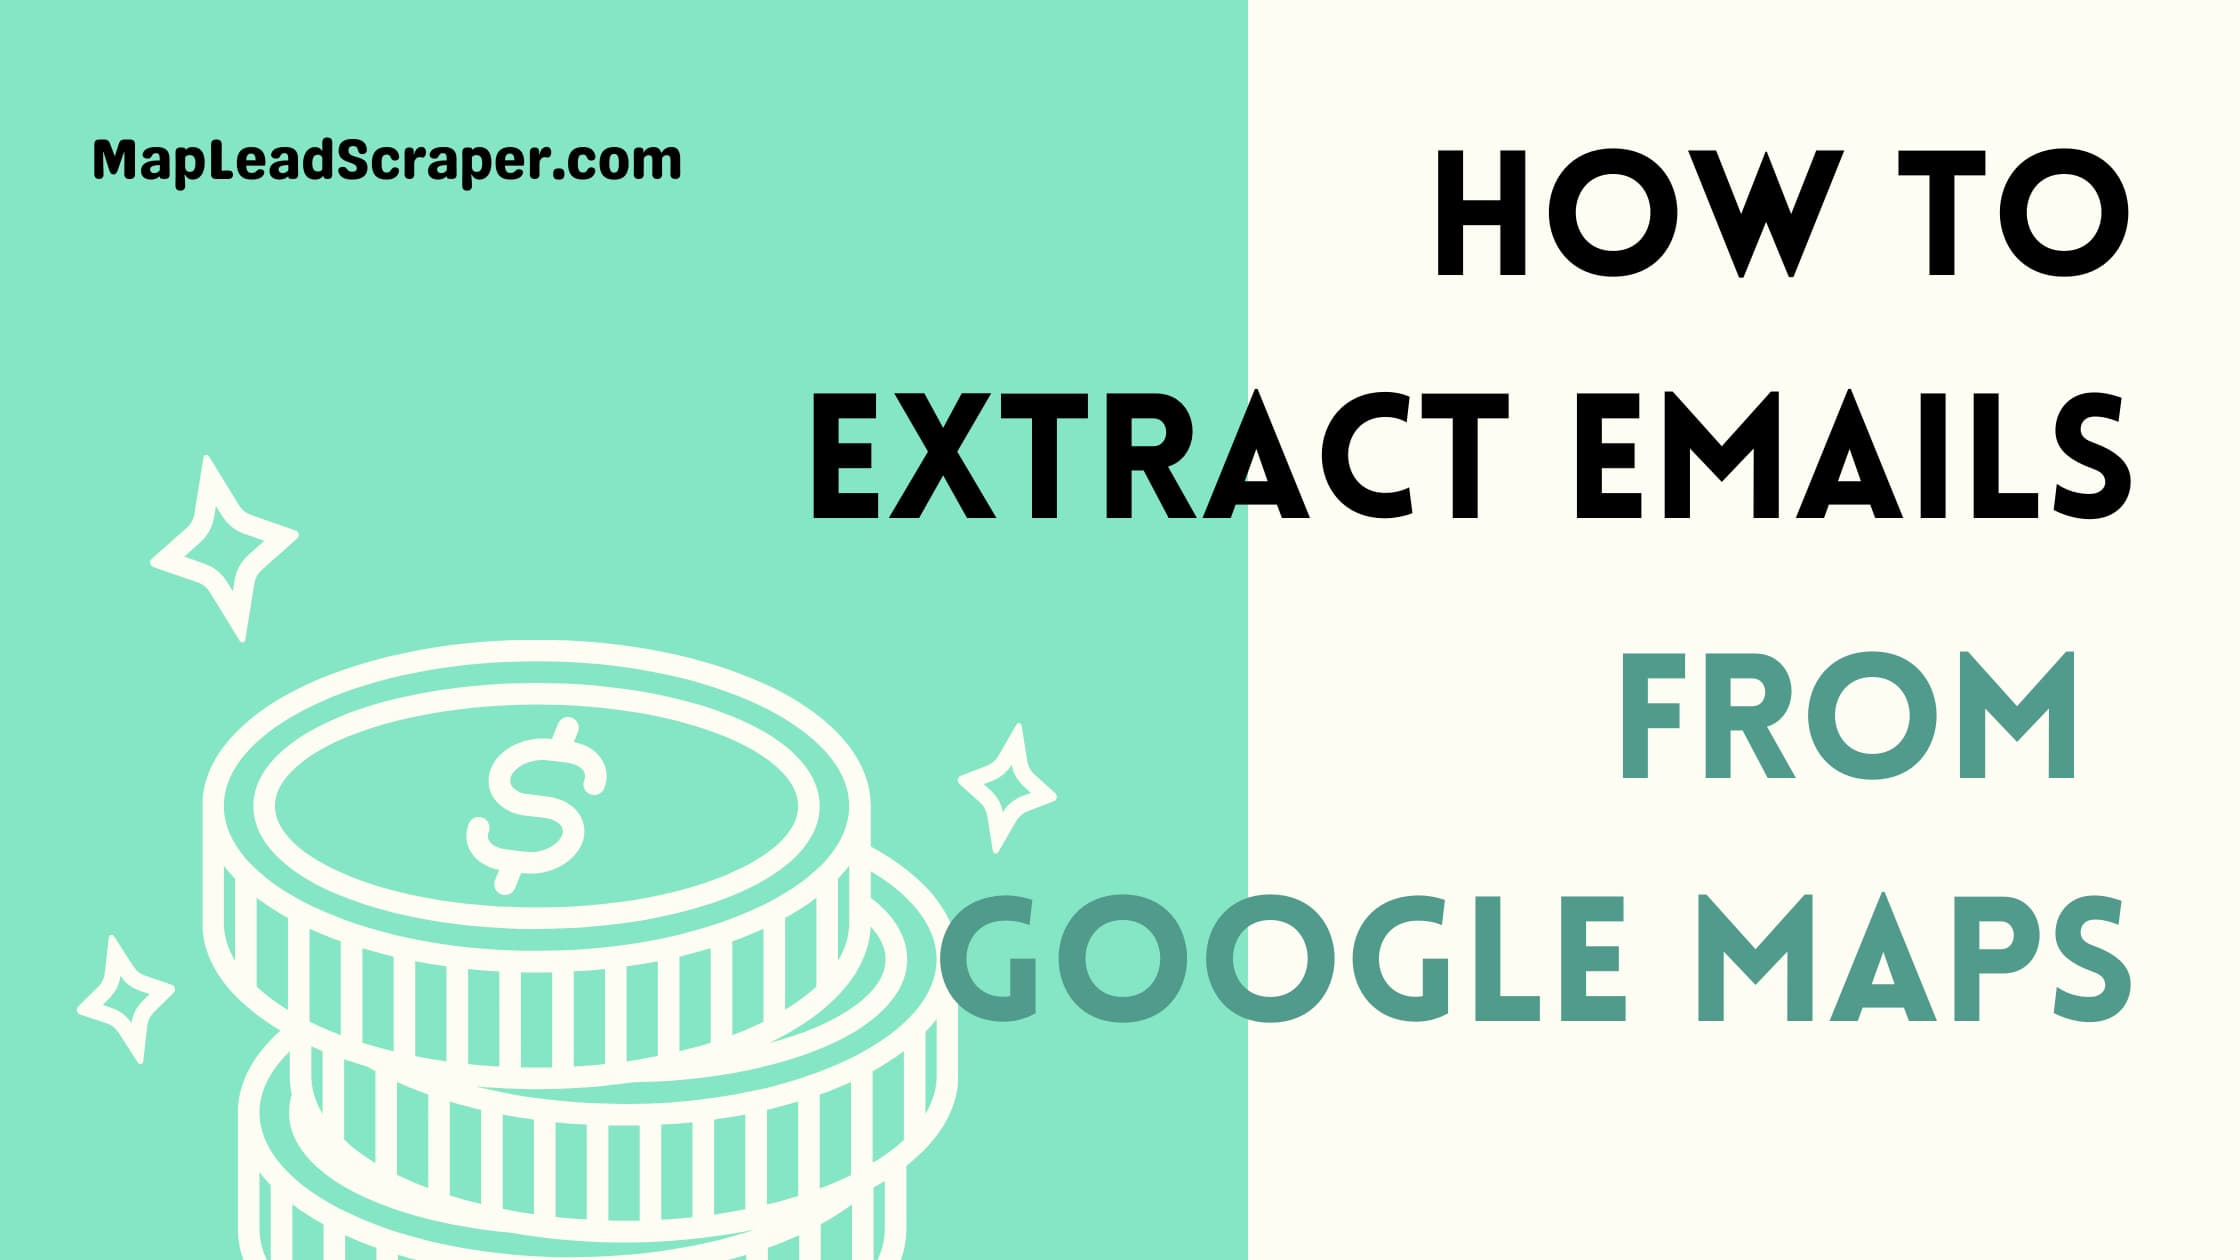 How To Extract Emails From Google Maps (Step-By-Step)